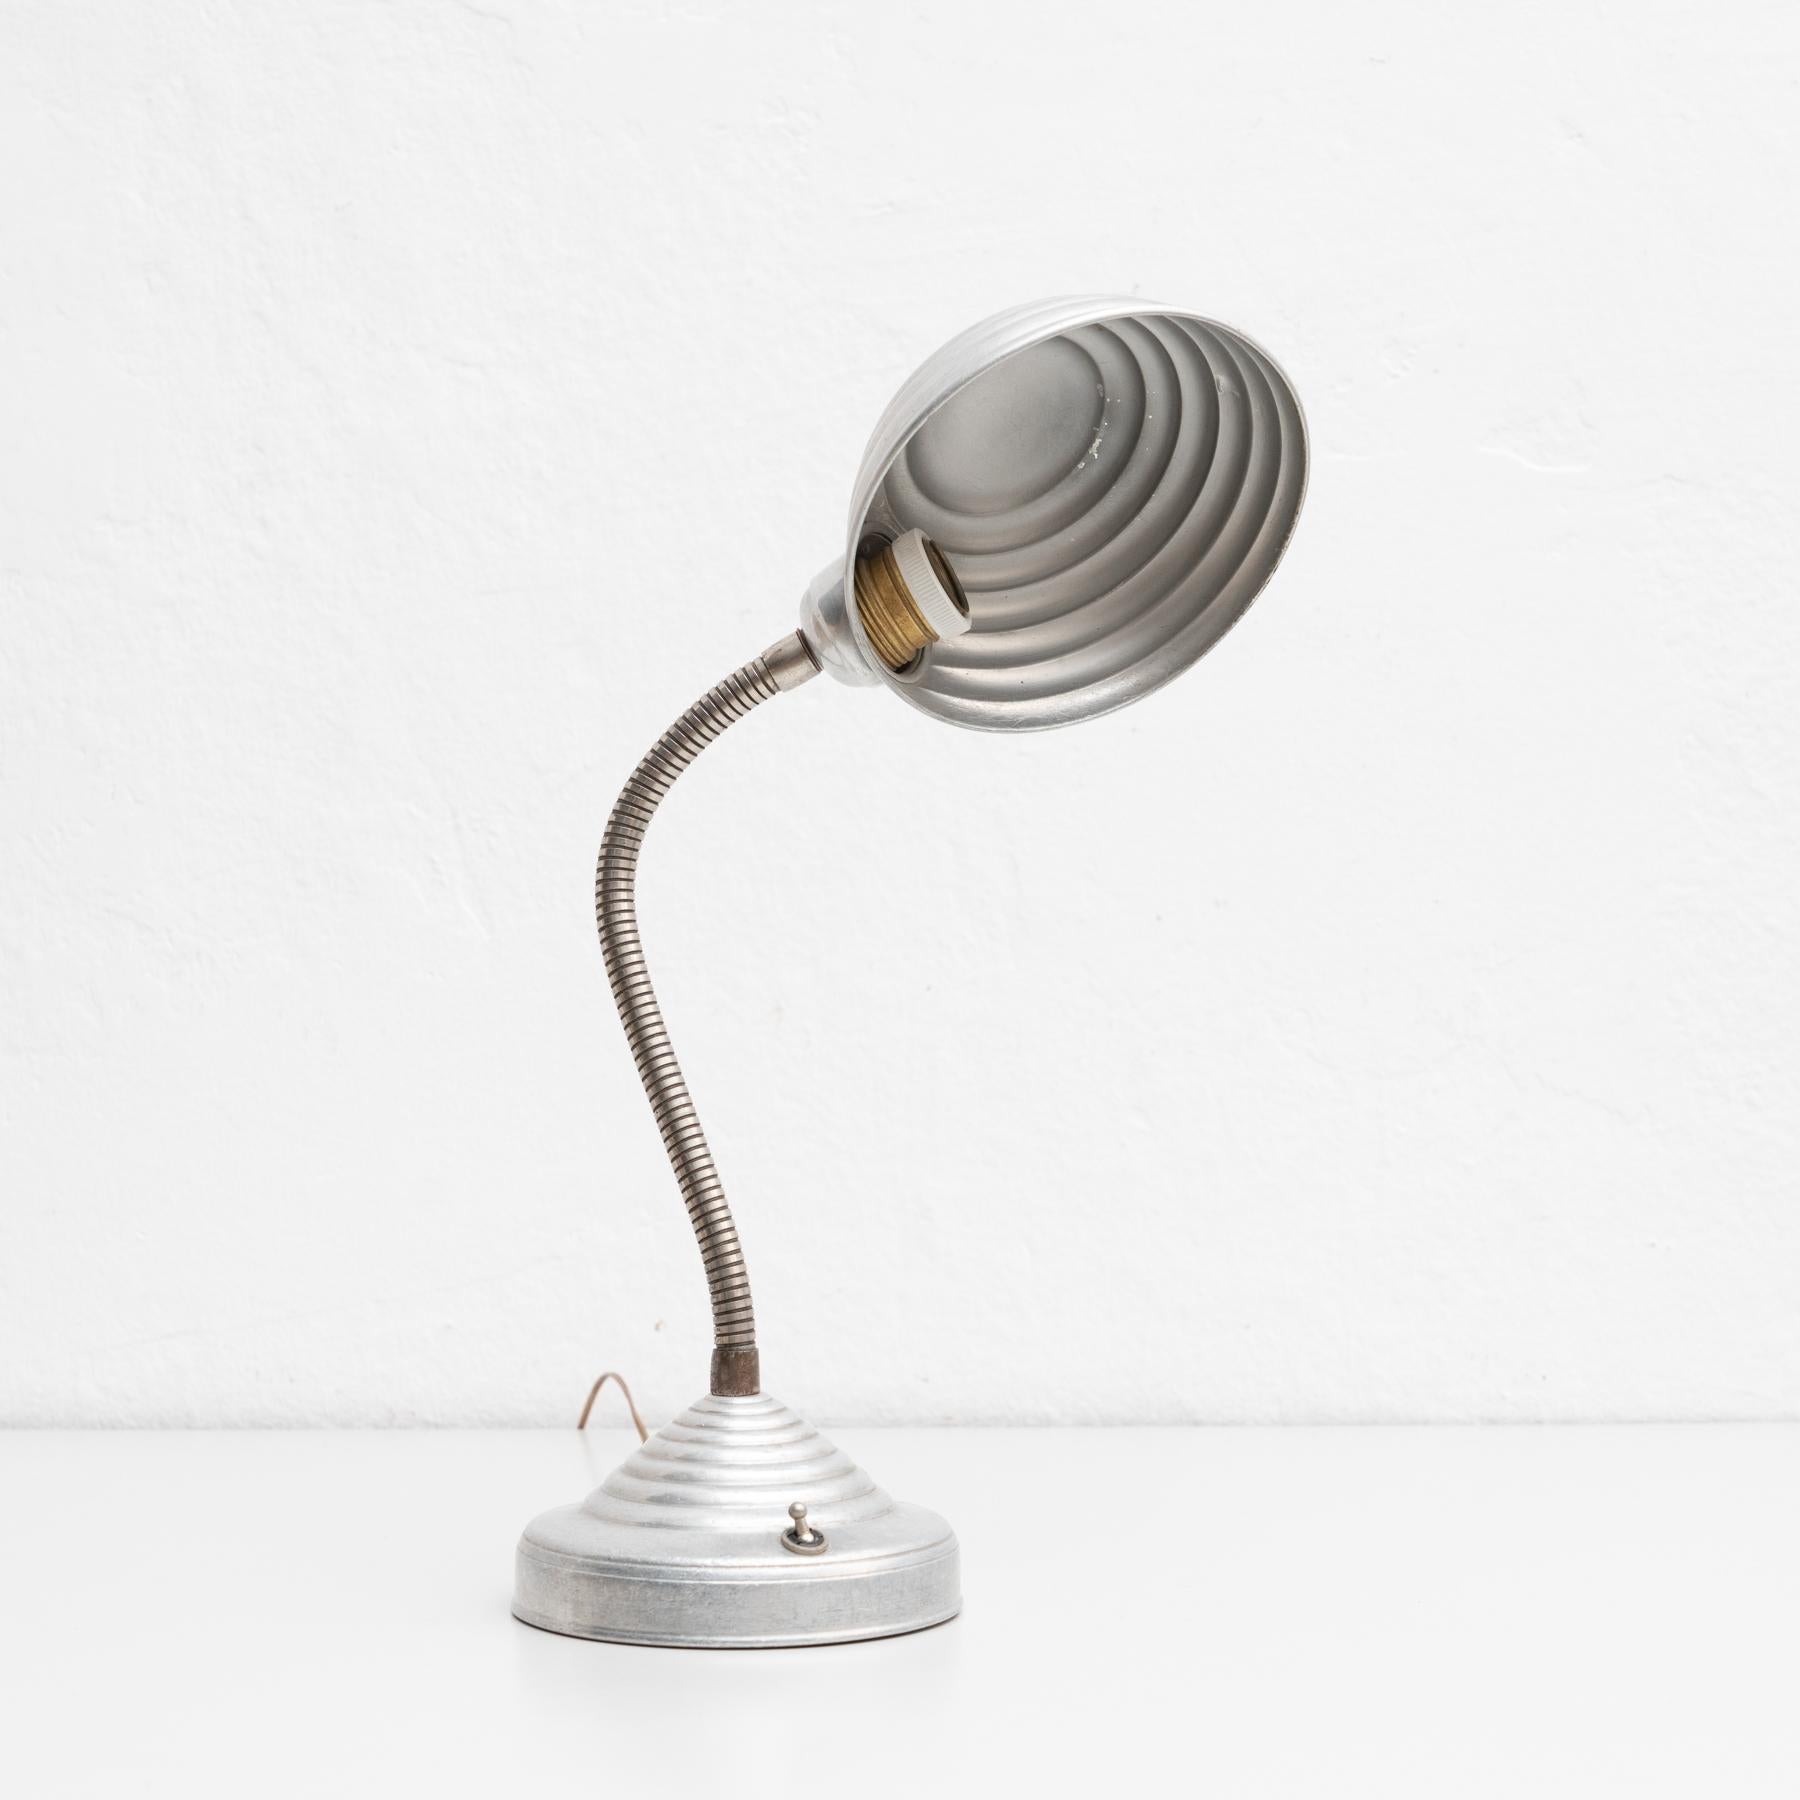 Mid-Century Modern table lamp.

By unknown manufacturer from France, circa 1960.

In original condition, with minor wear consistent with age and use, preserving a beautiful patina.

Material:
Metal

Electrification not tested. Wired for Europe.